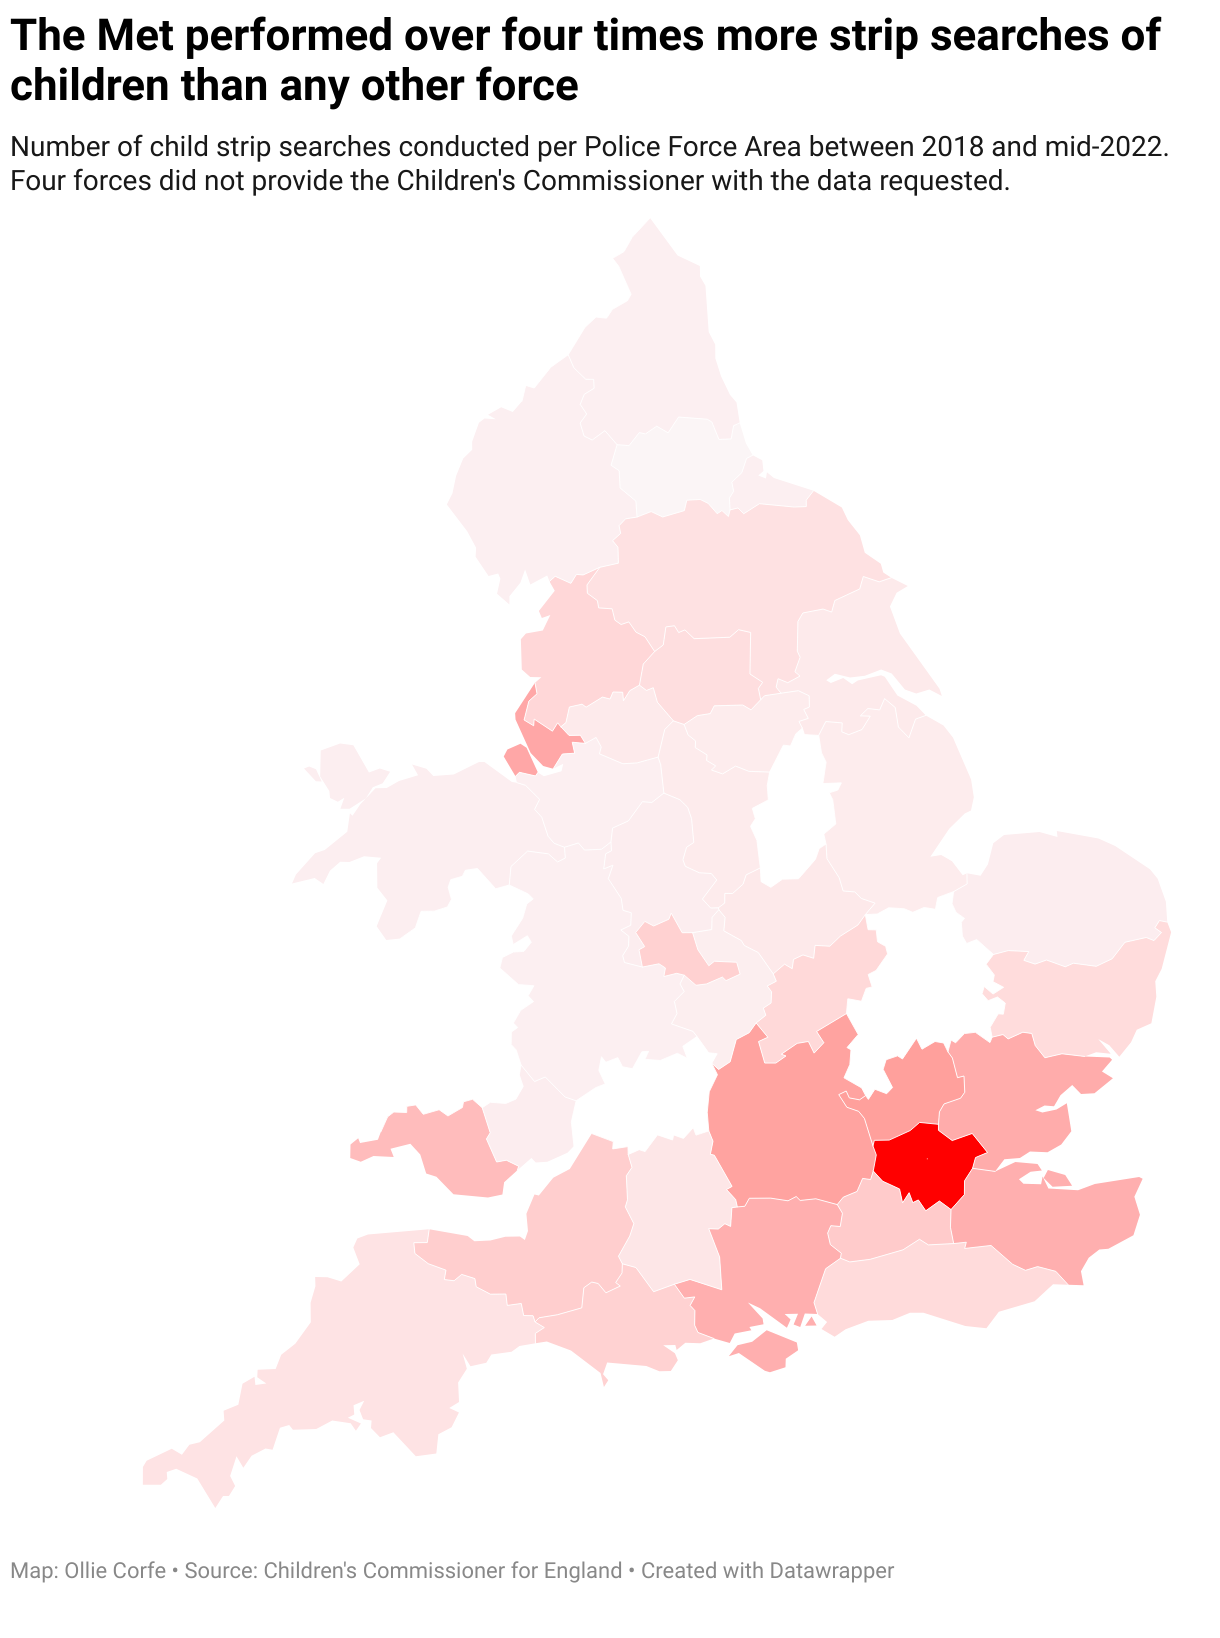 Map of strip searches by police force in England.